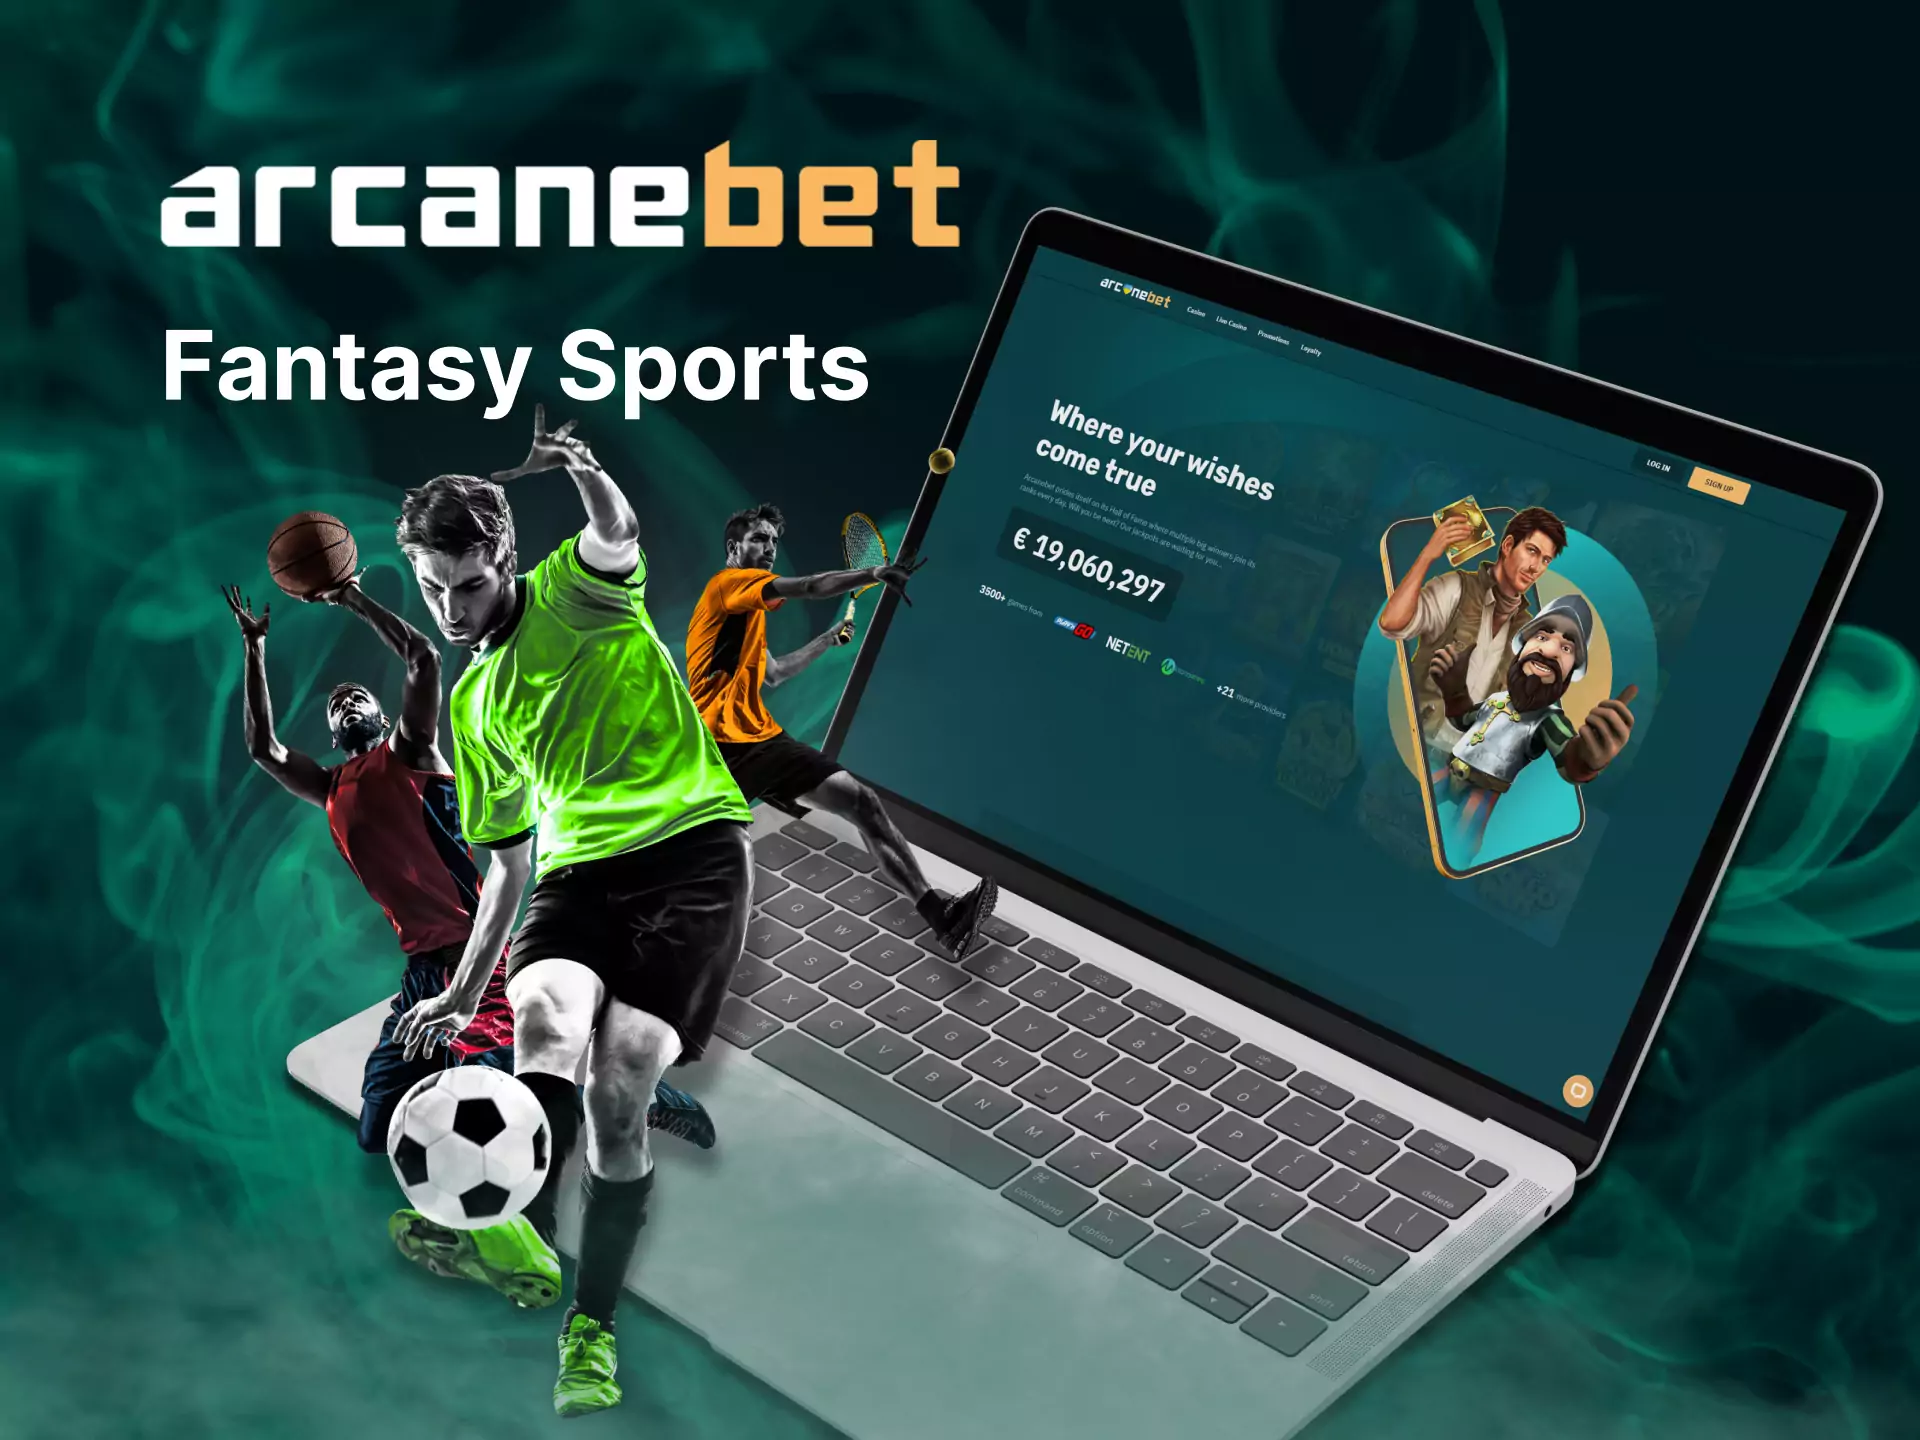 Choose an athlete and place bets, root for him in Arcanebet and win.